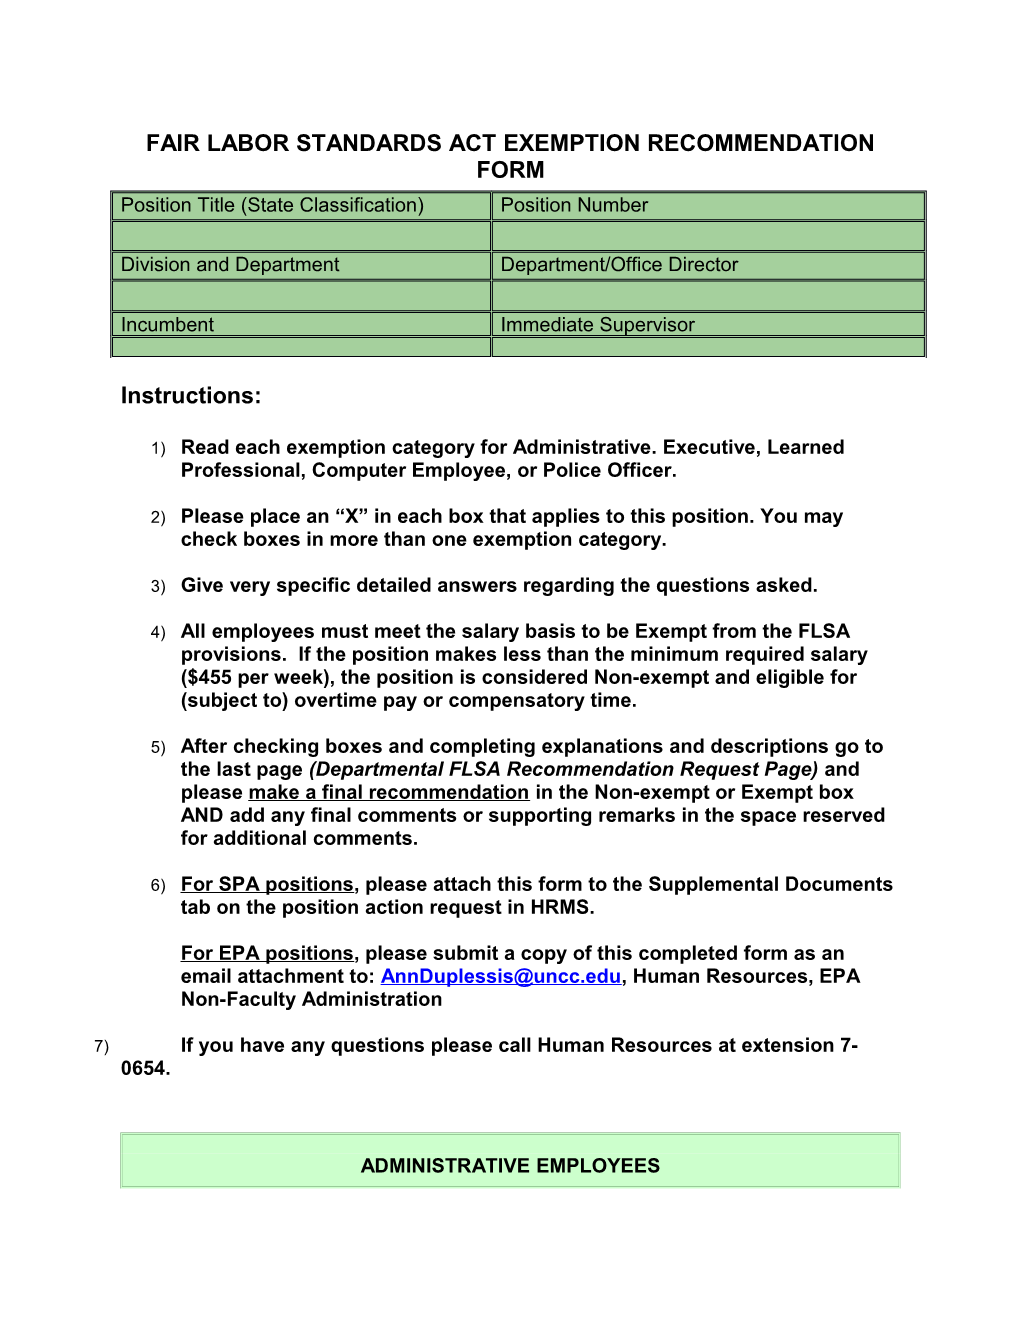 FAIR LABOR STANDARDS ACT EXEMPTION RECOMMENDATION FORM Top of Form